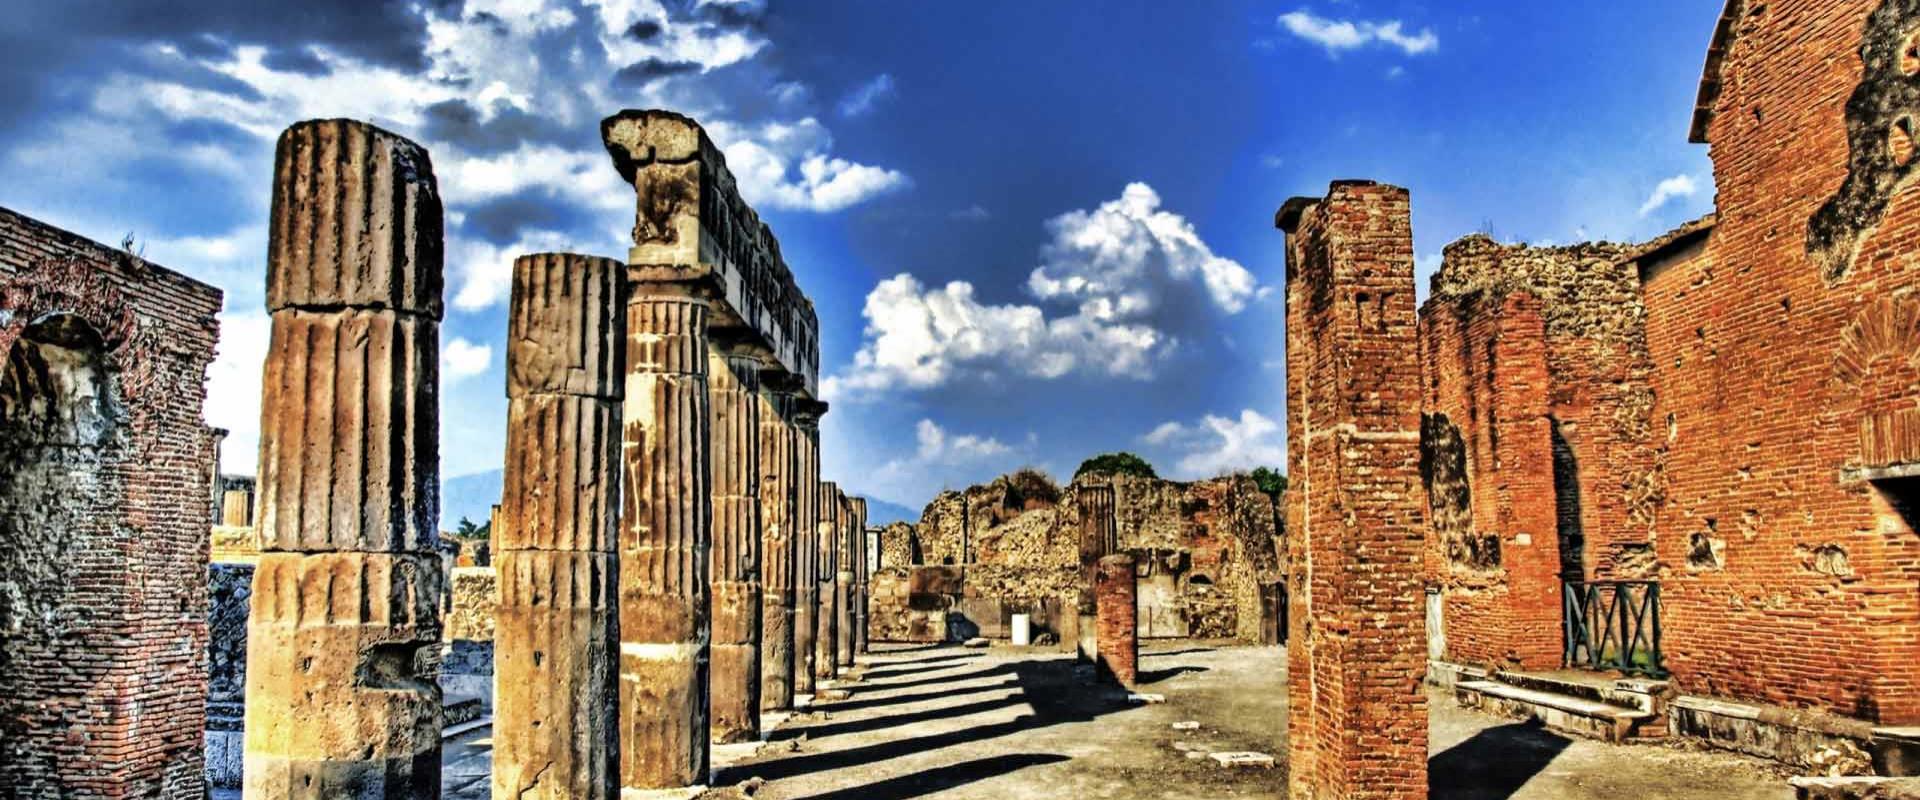 Discover the archaeological site of Pompeii and reserve your room at the BW Signature Collection Hotel Paradiso!